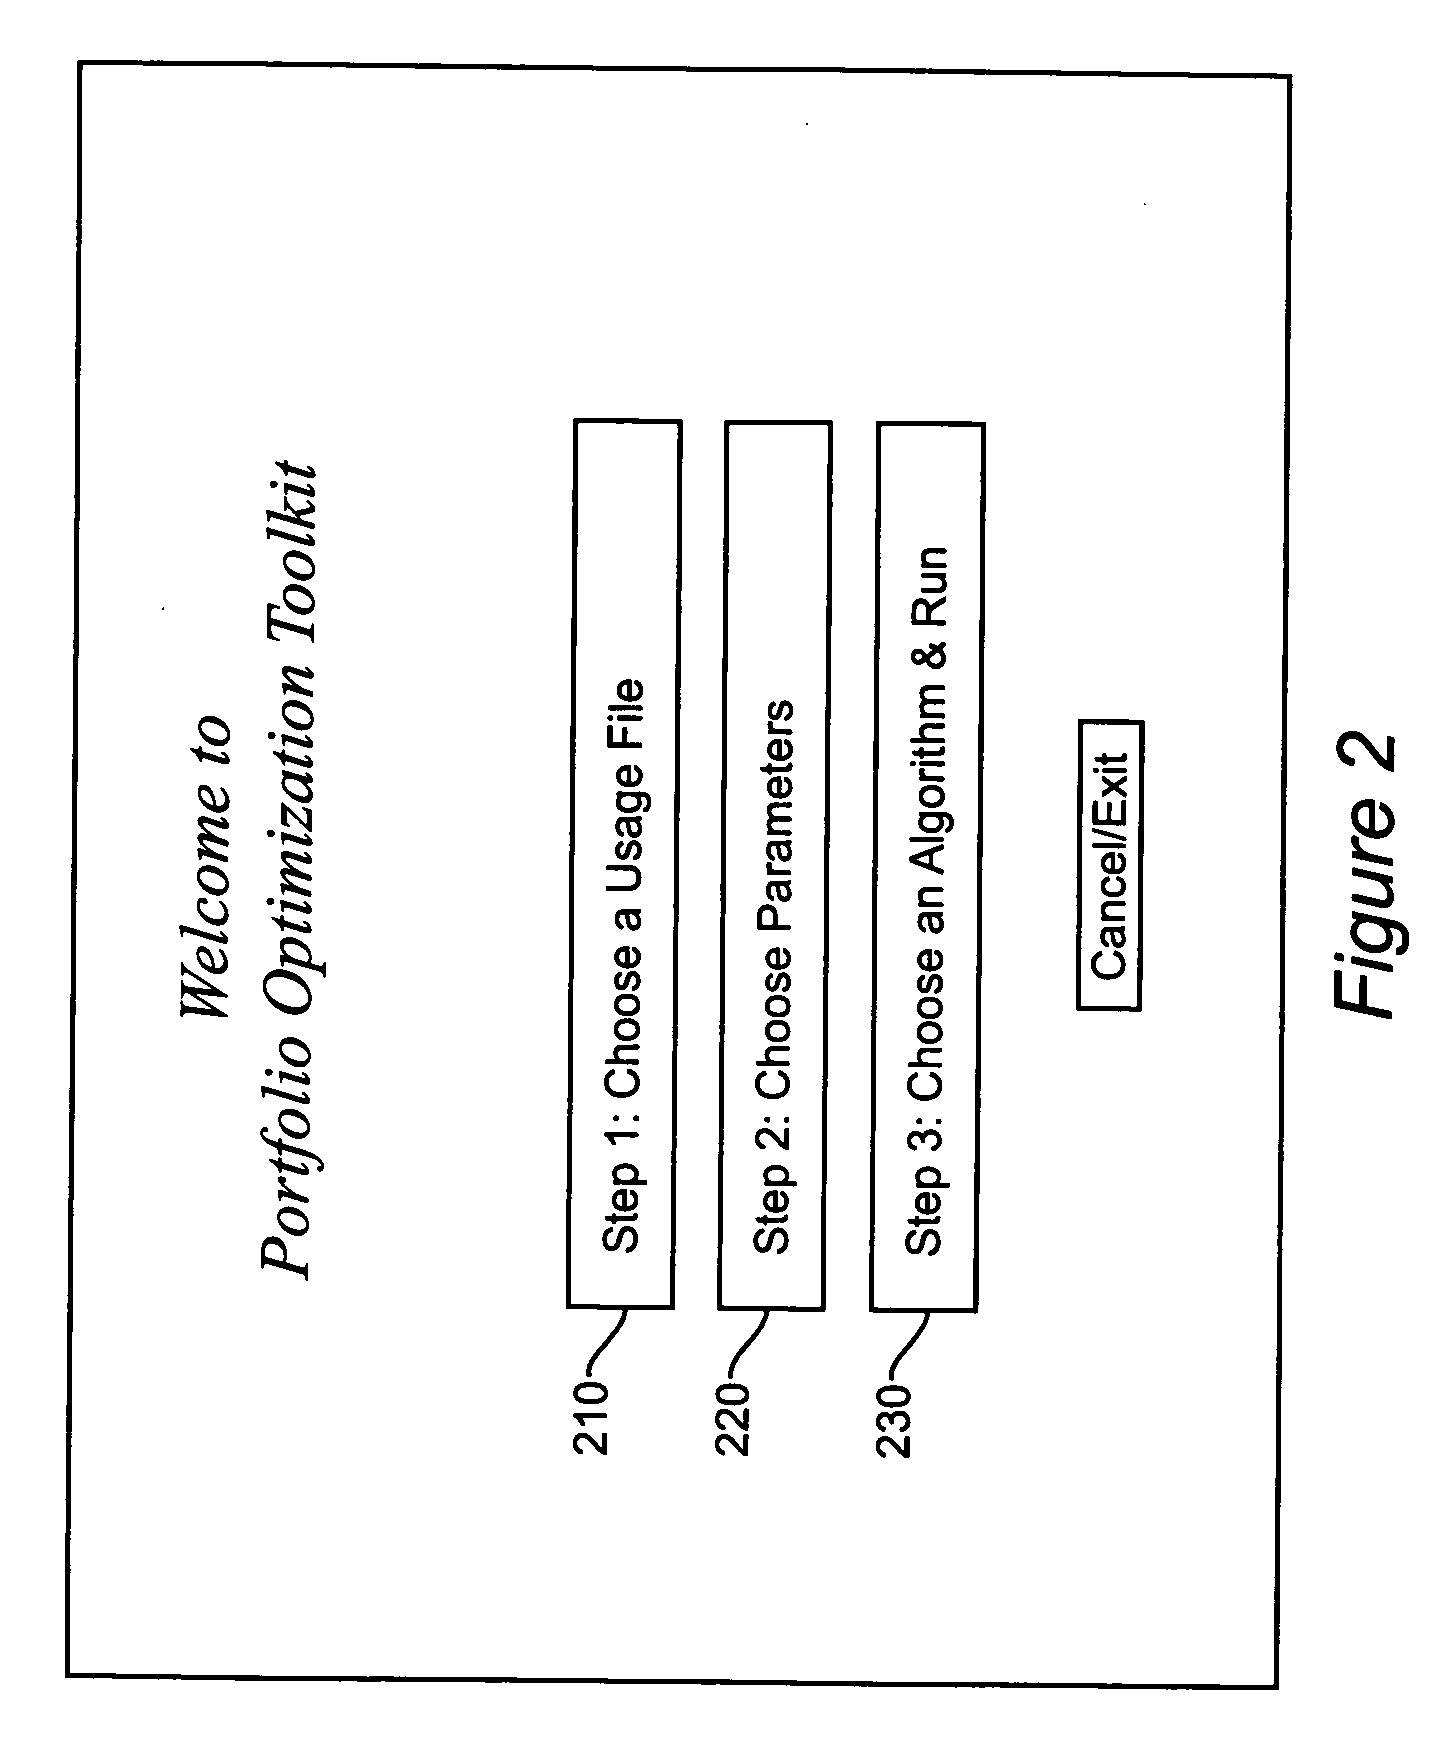 Method and apparatus for capacity optimization and planning in an on-demand computing environment